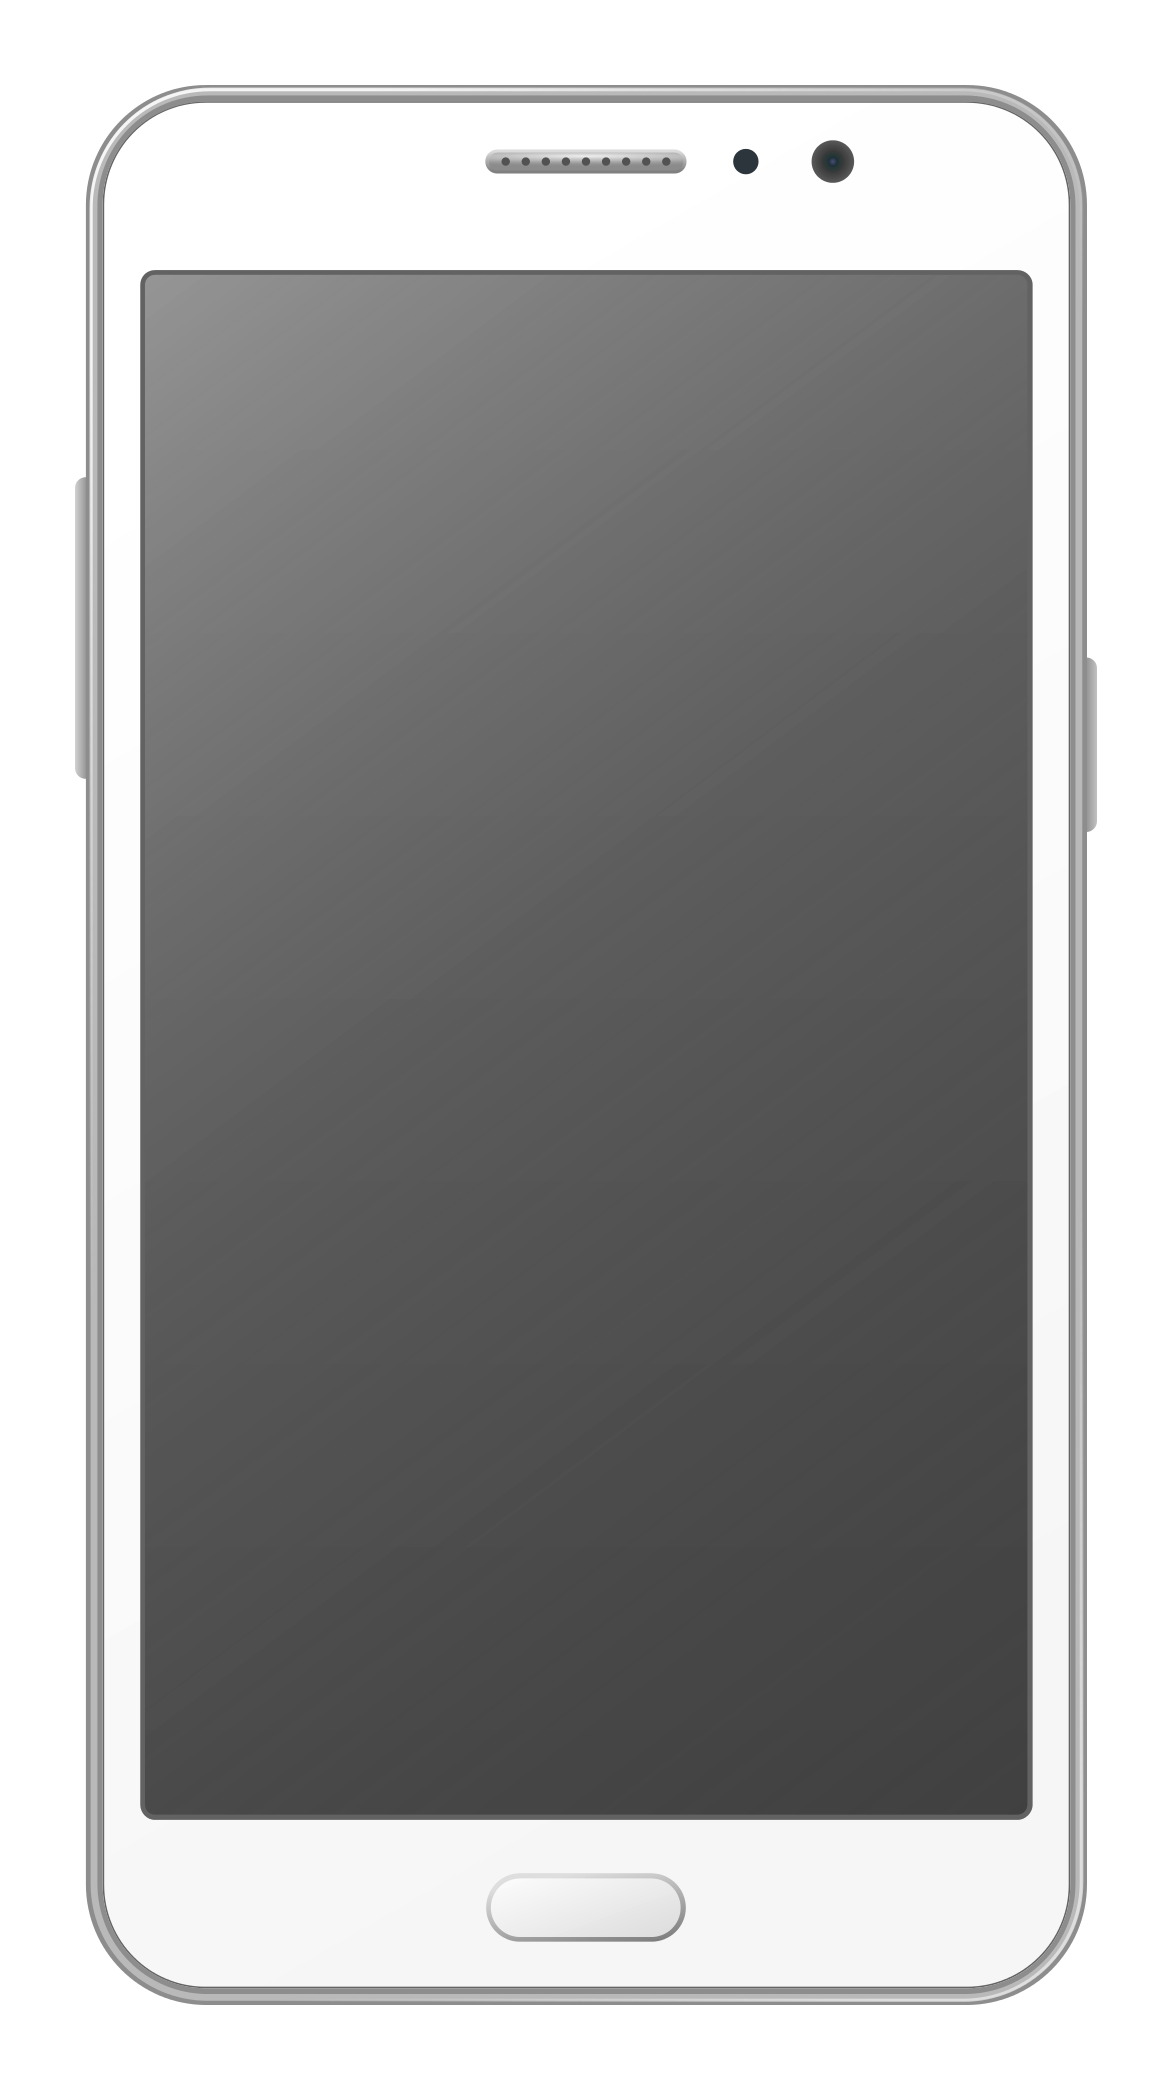 Smartphone PNG image